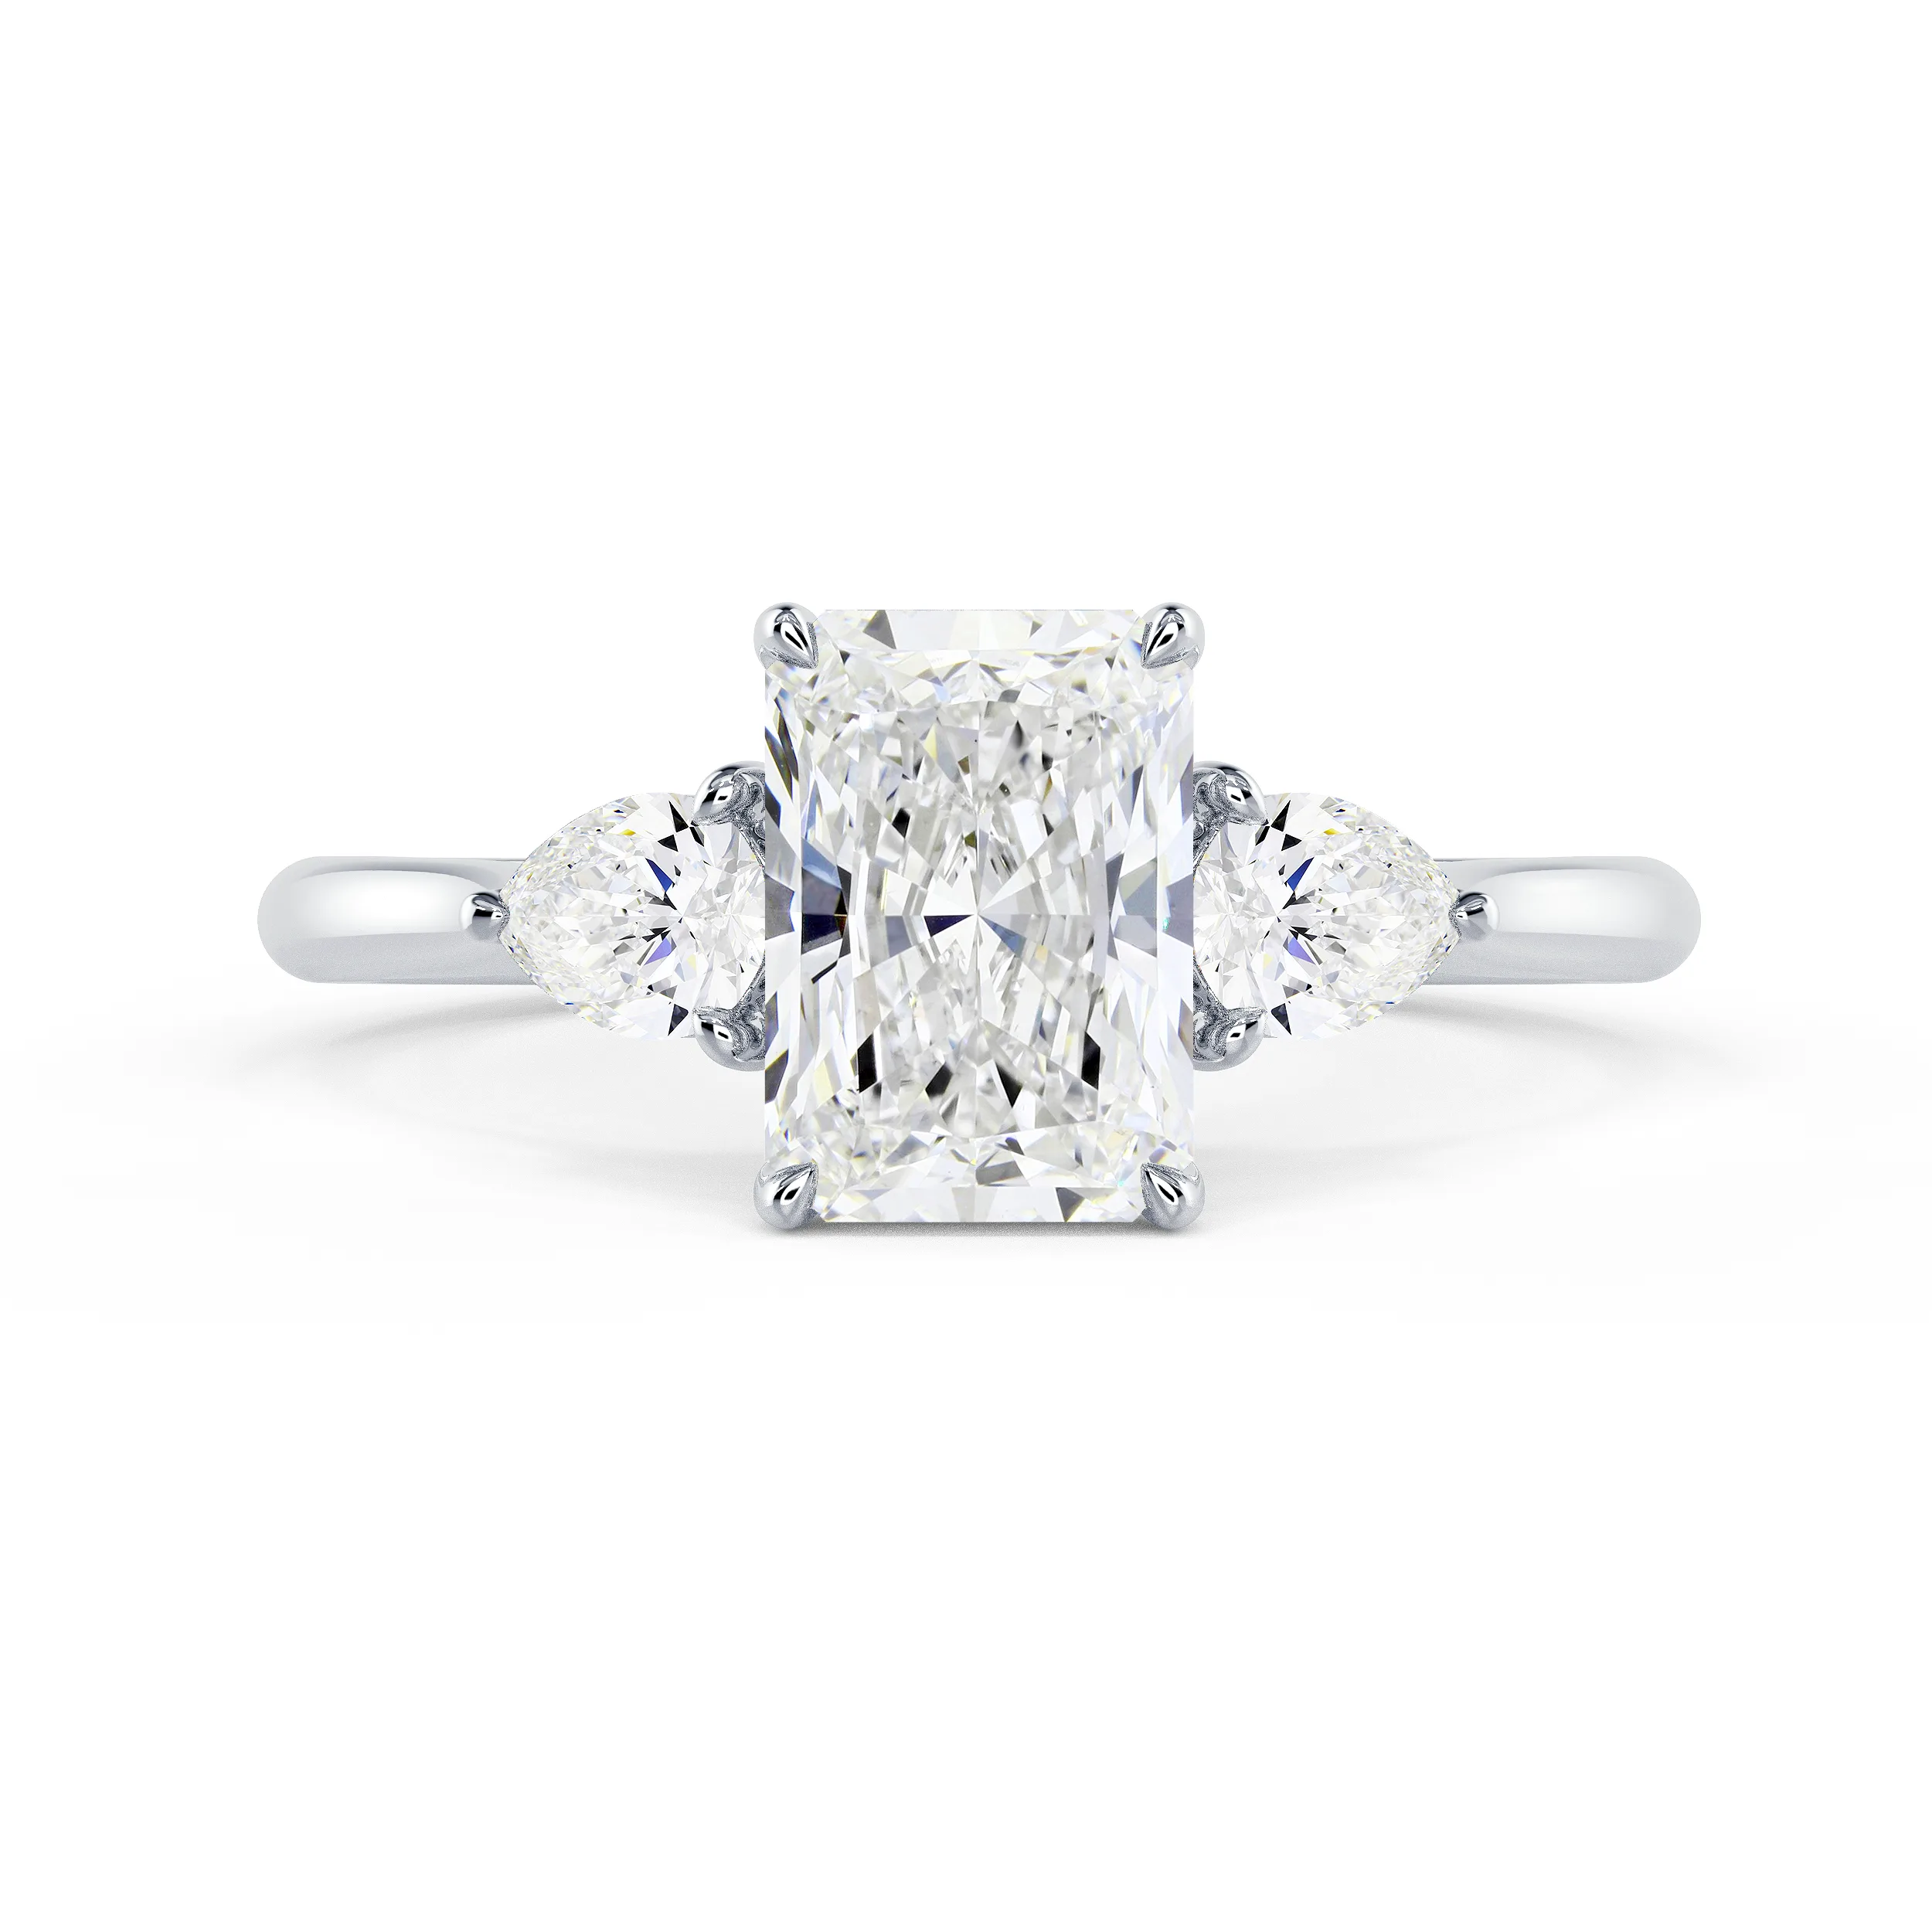 Diamonds set in White Gold Radiant and Pear Setting (Main View)